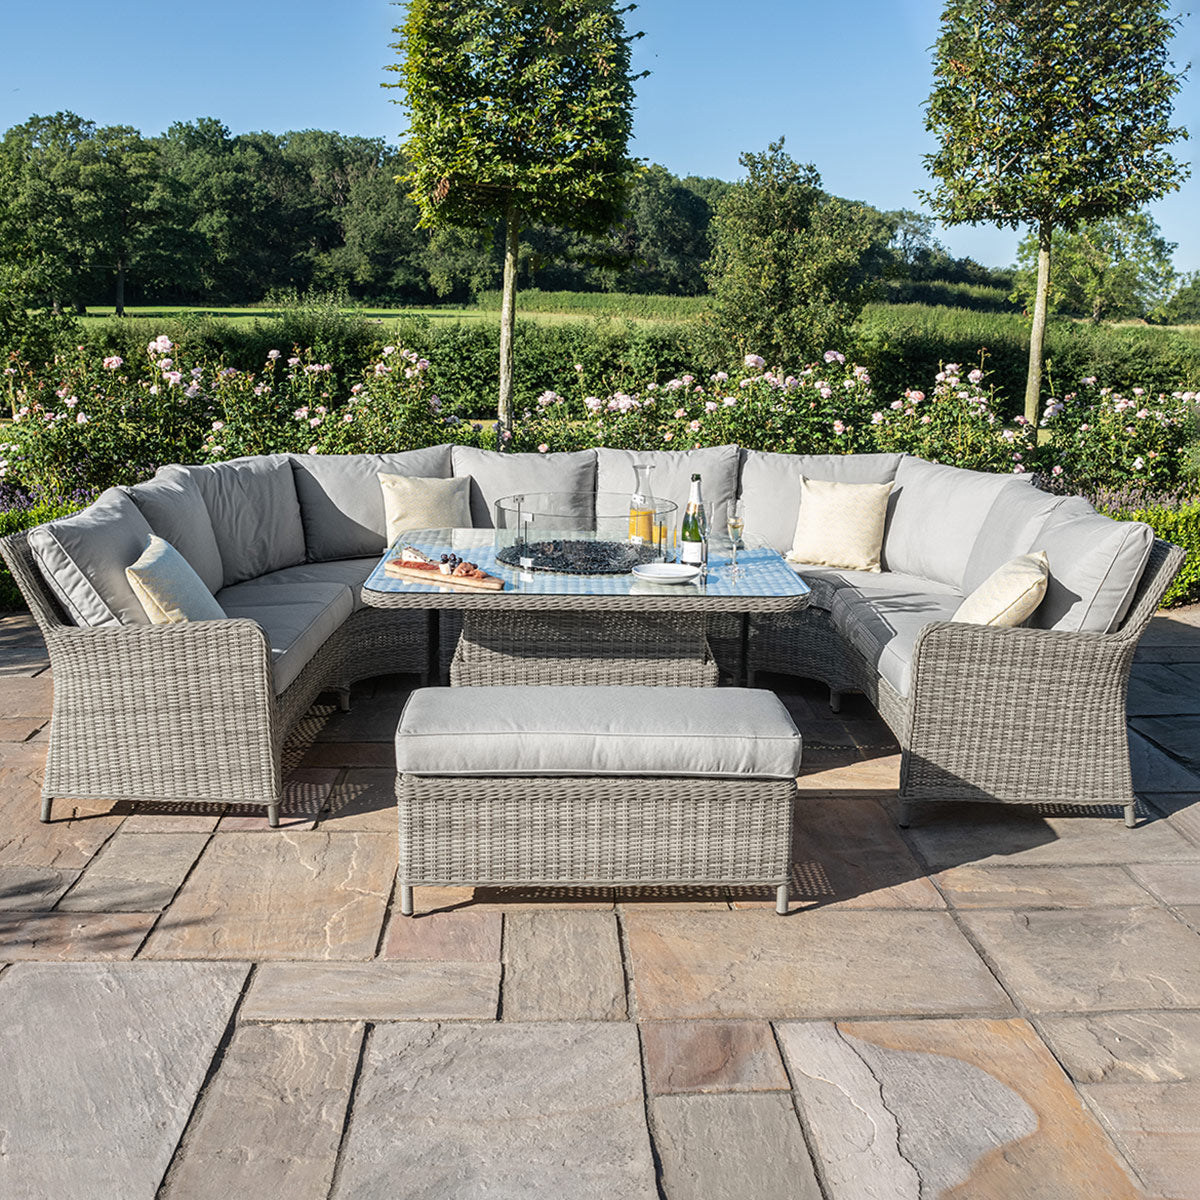 Light grey coloured rattan u shape sofa with matching bench and square fire pit table.